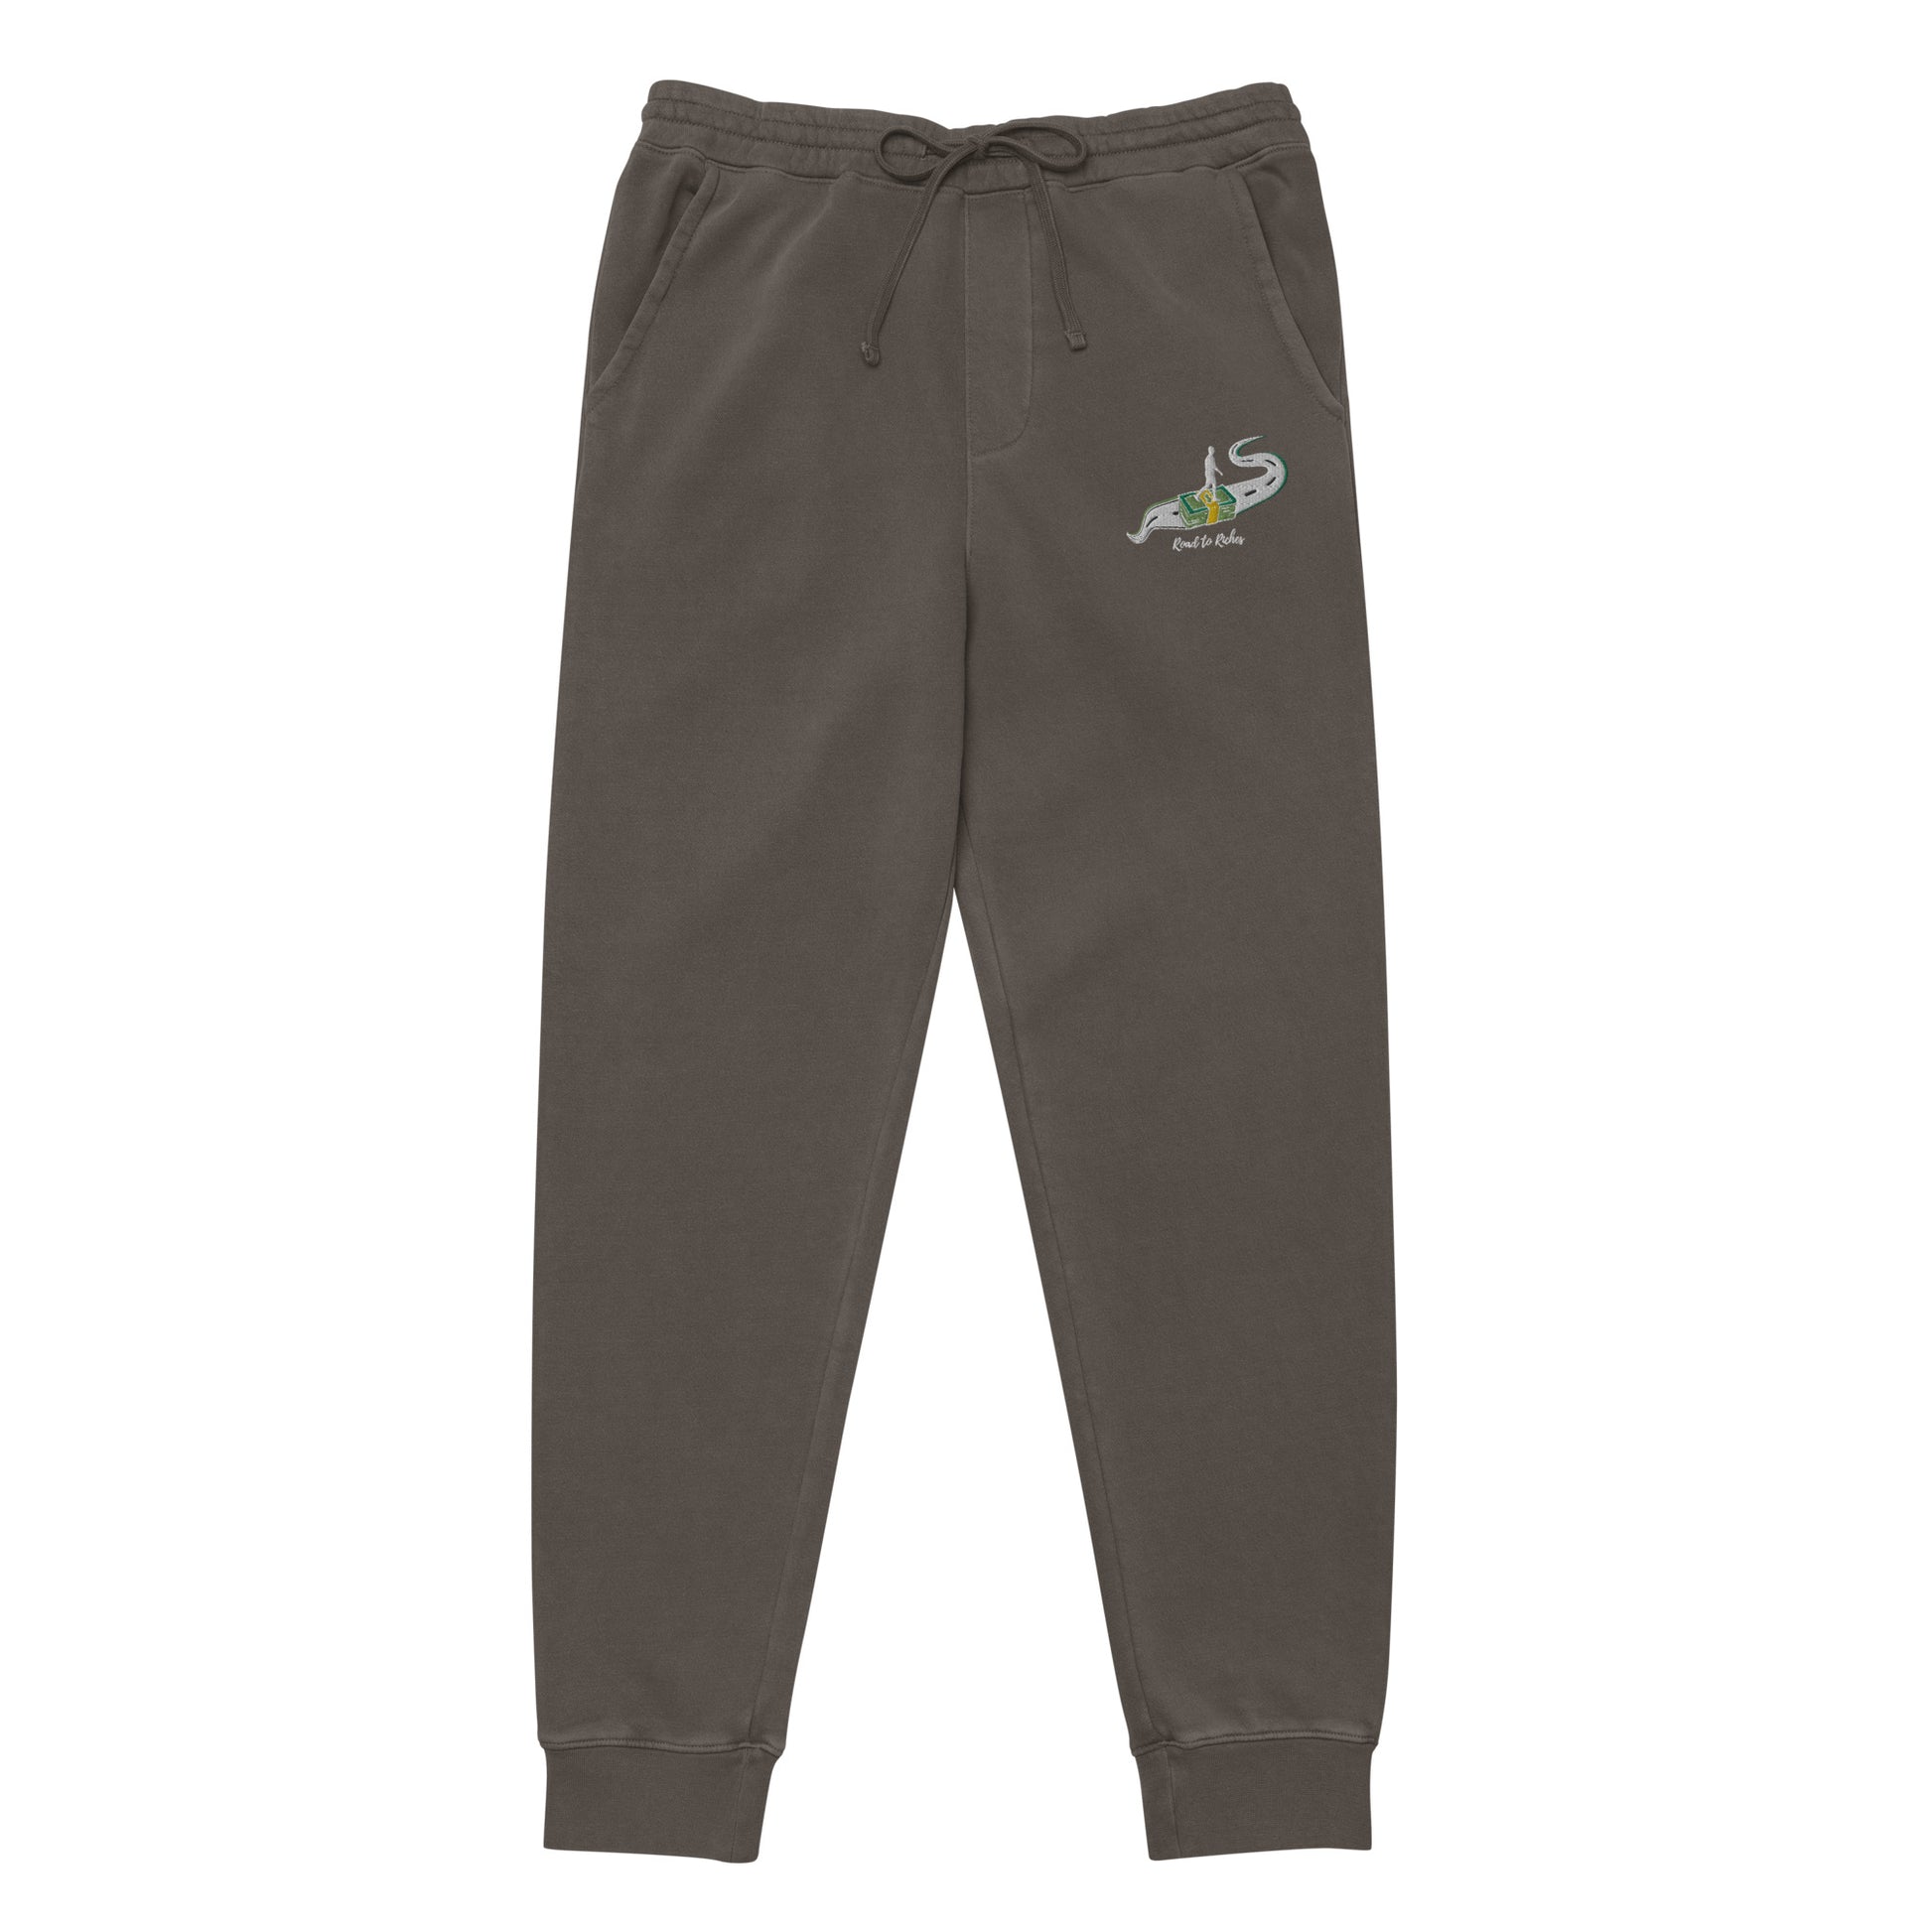 Road to Riches Unisex Sweatpants - Pigment Dyed - Conscious tees inc.